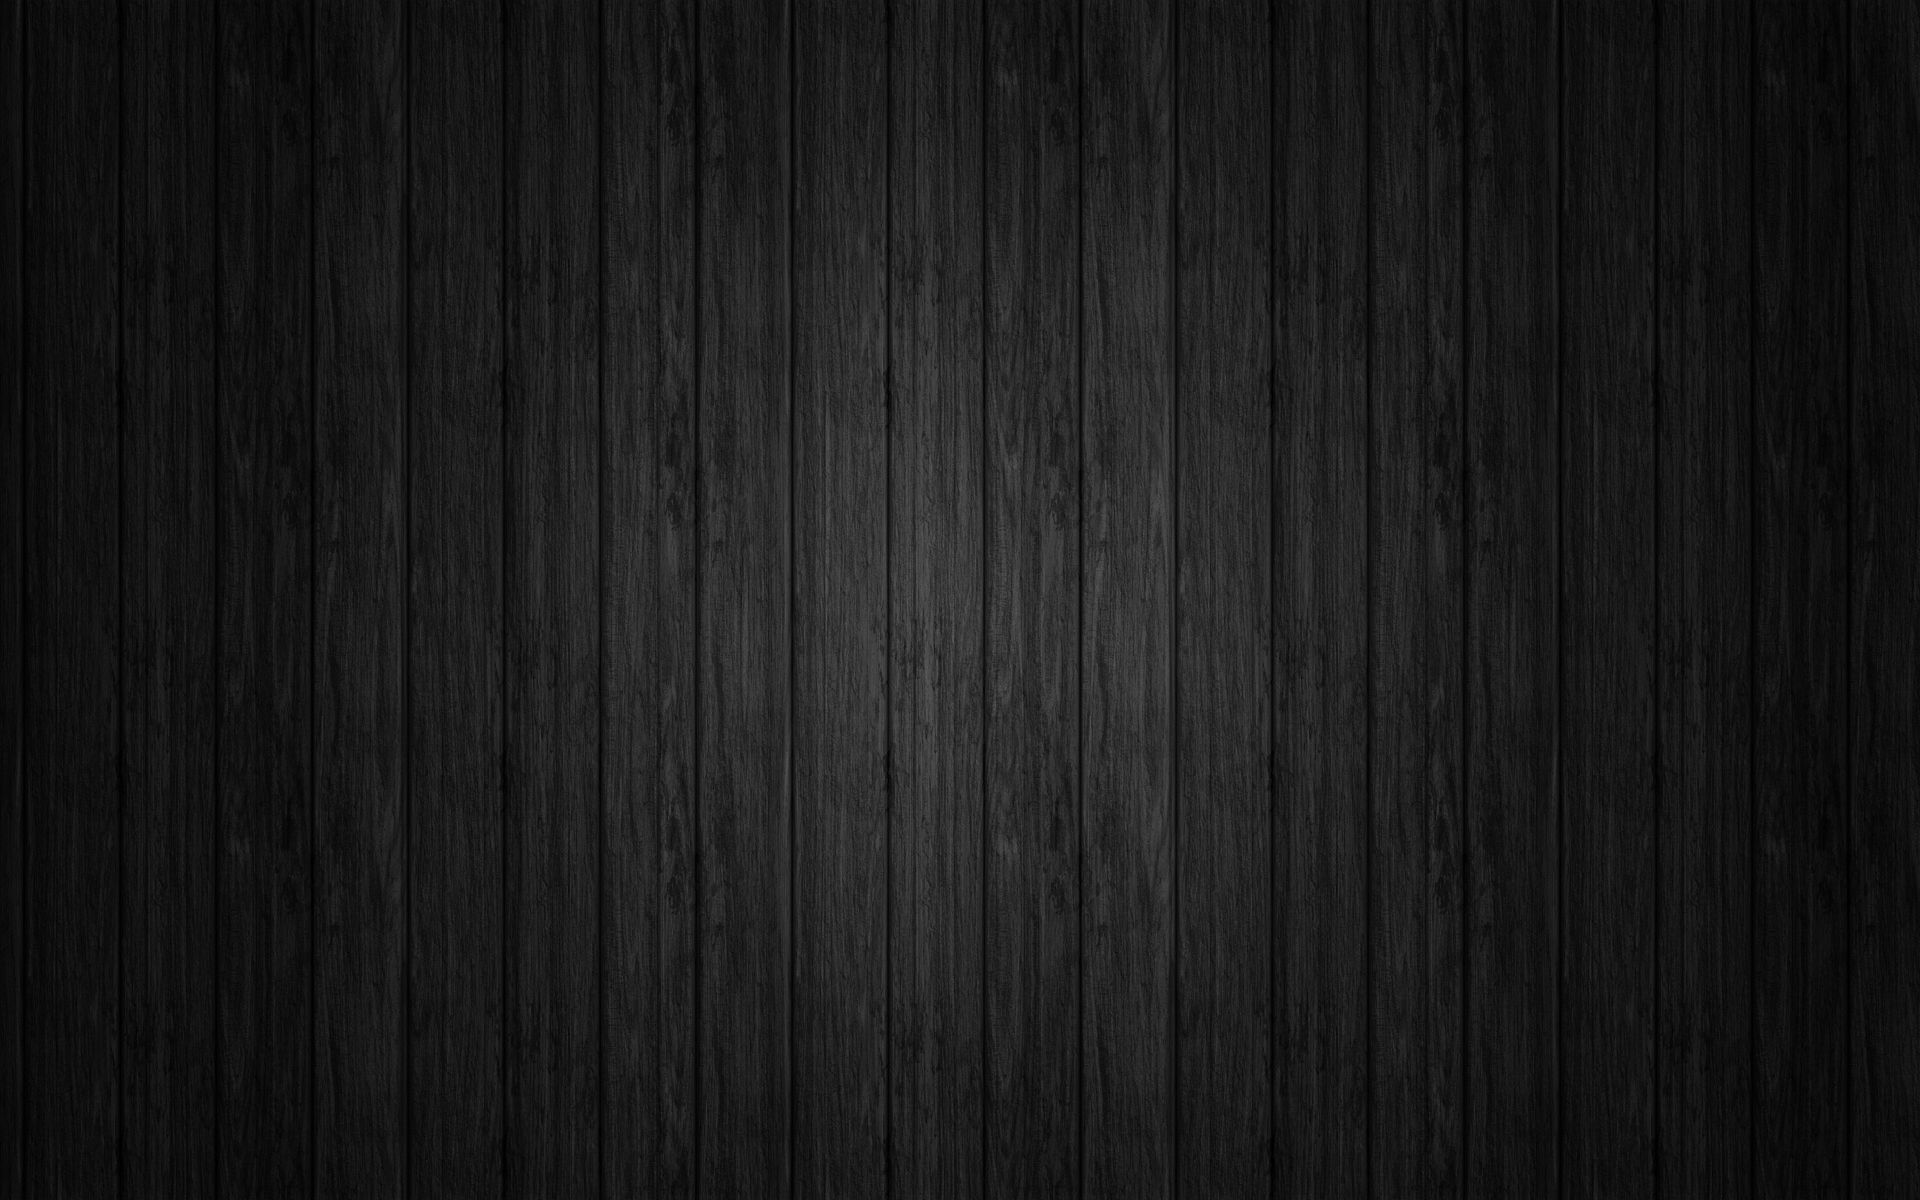 Download wallpaper 1920x1200 board, black, line, texture, background, wood widescreen 16:10 HD background